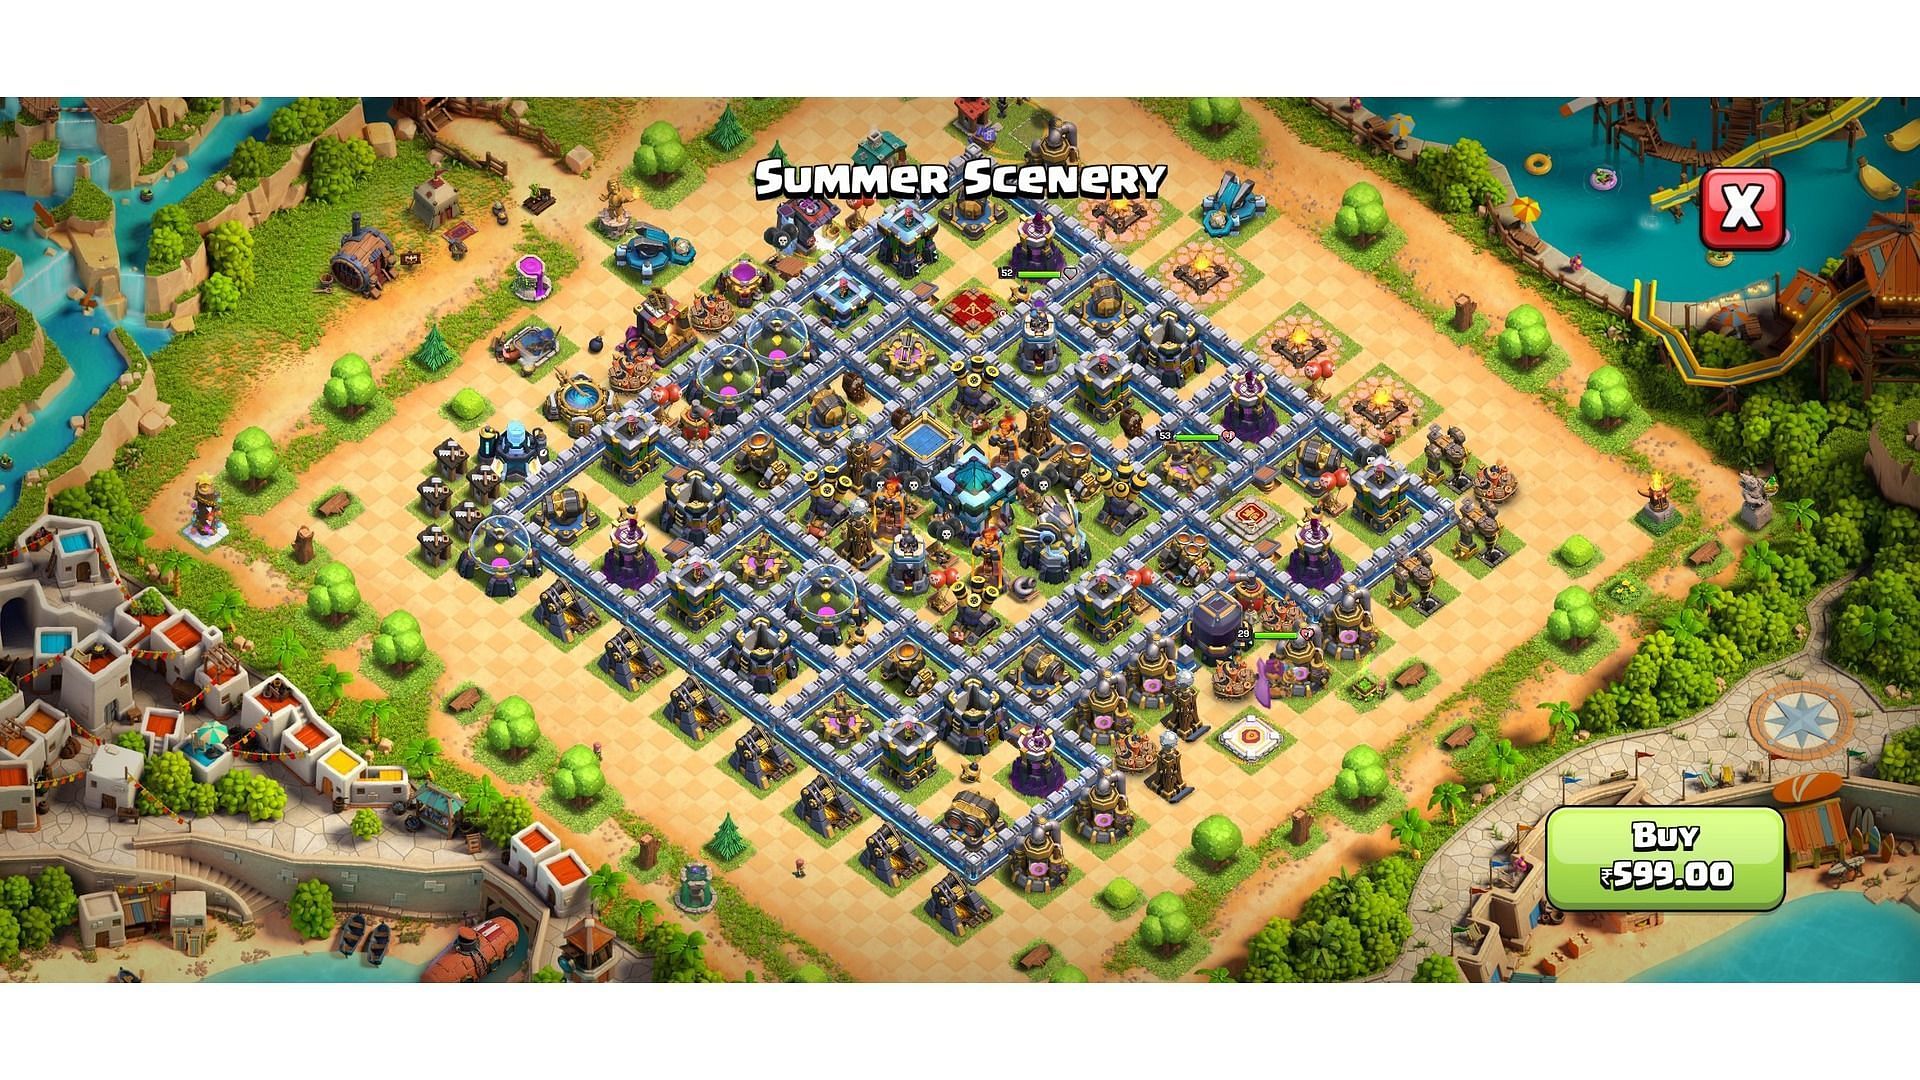 Summer Scenery (Image via Supercell)